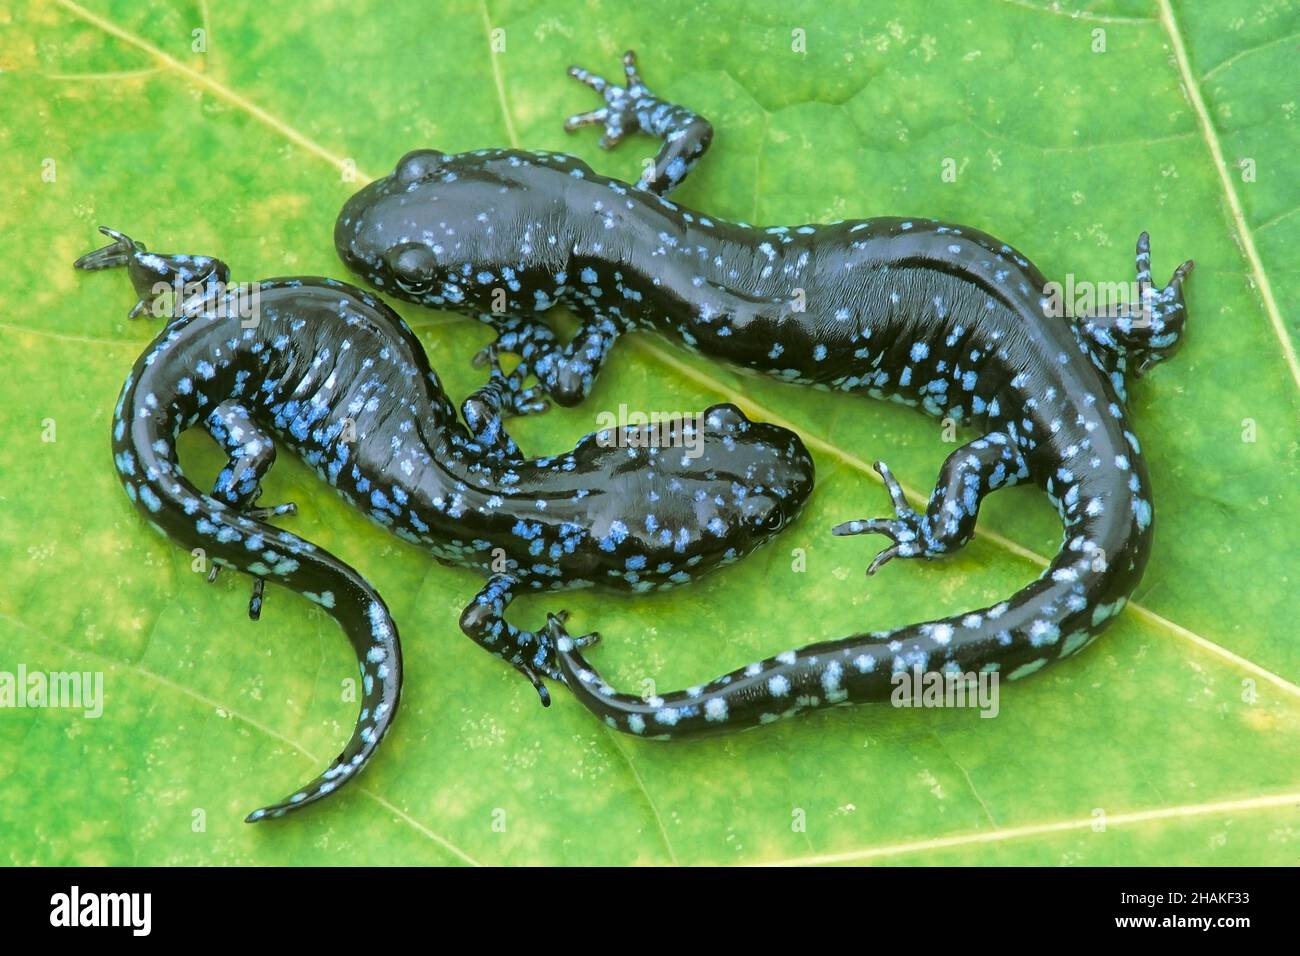 Pair of Blue-spotted salamanders (Ambystoma laterale), resting on leaf near woodland pond, E USA, by Skip Moody/Dembinsky Photo Assoc Stock Photo